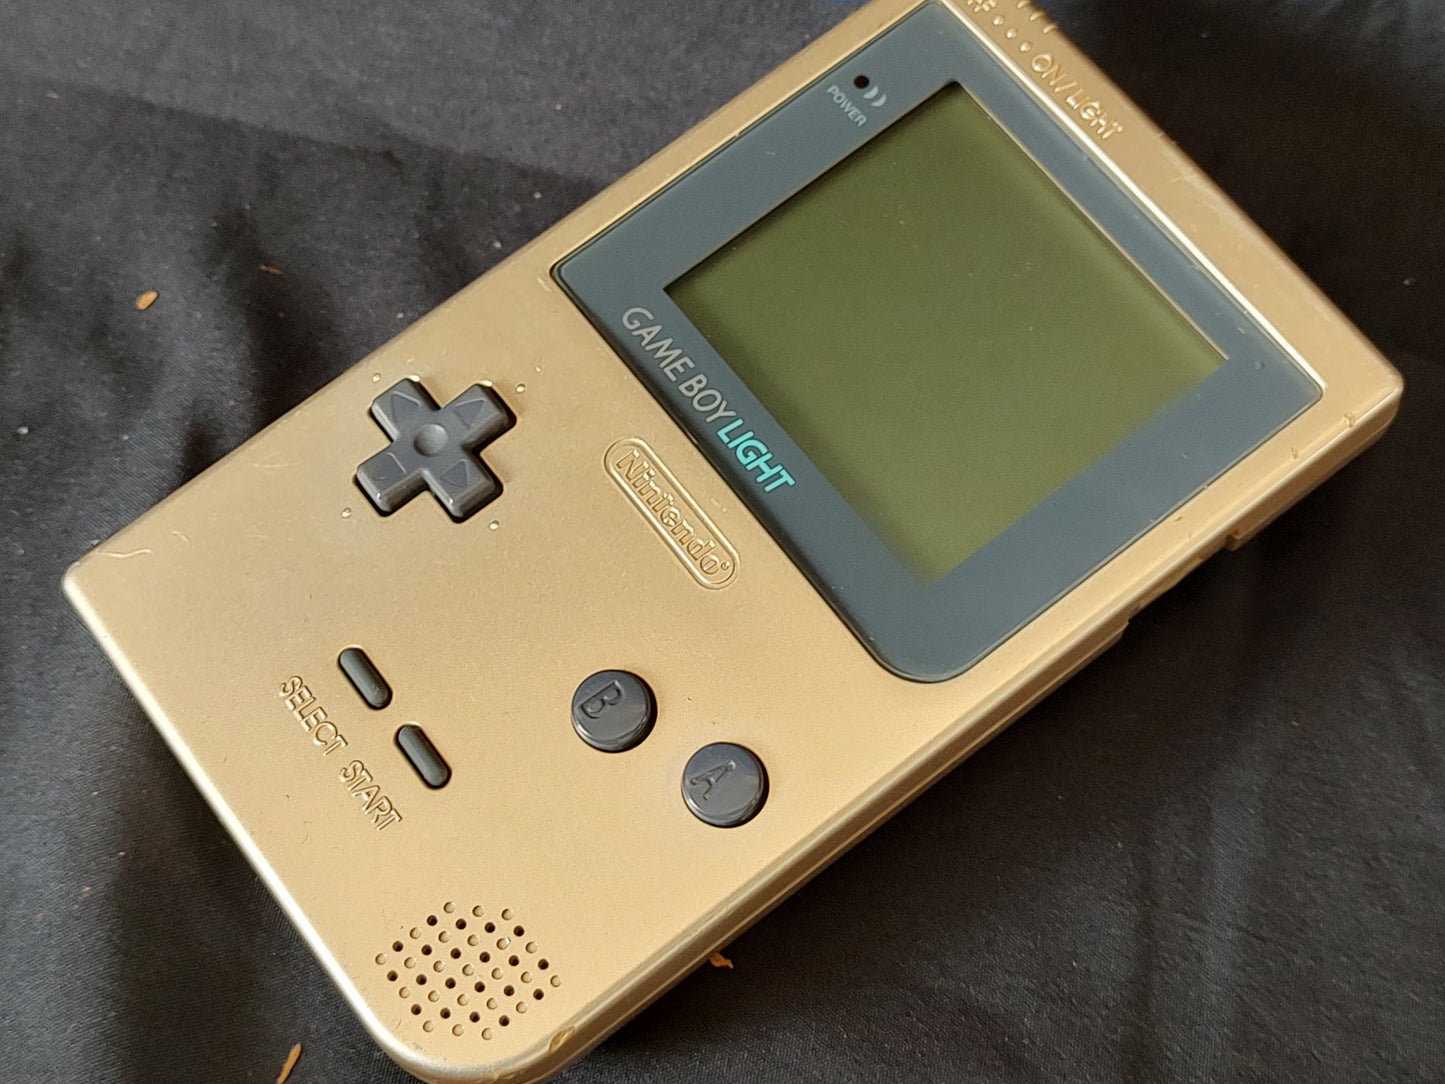 Nintendo Gameboy Light Gold color console MGB-101 and Game set/ Working-g0315-